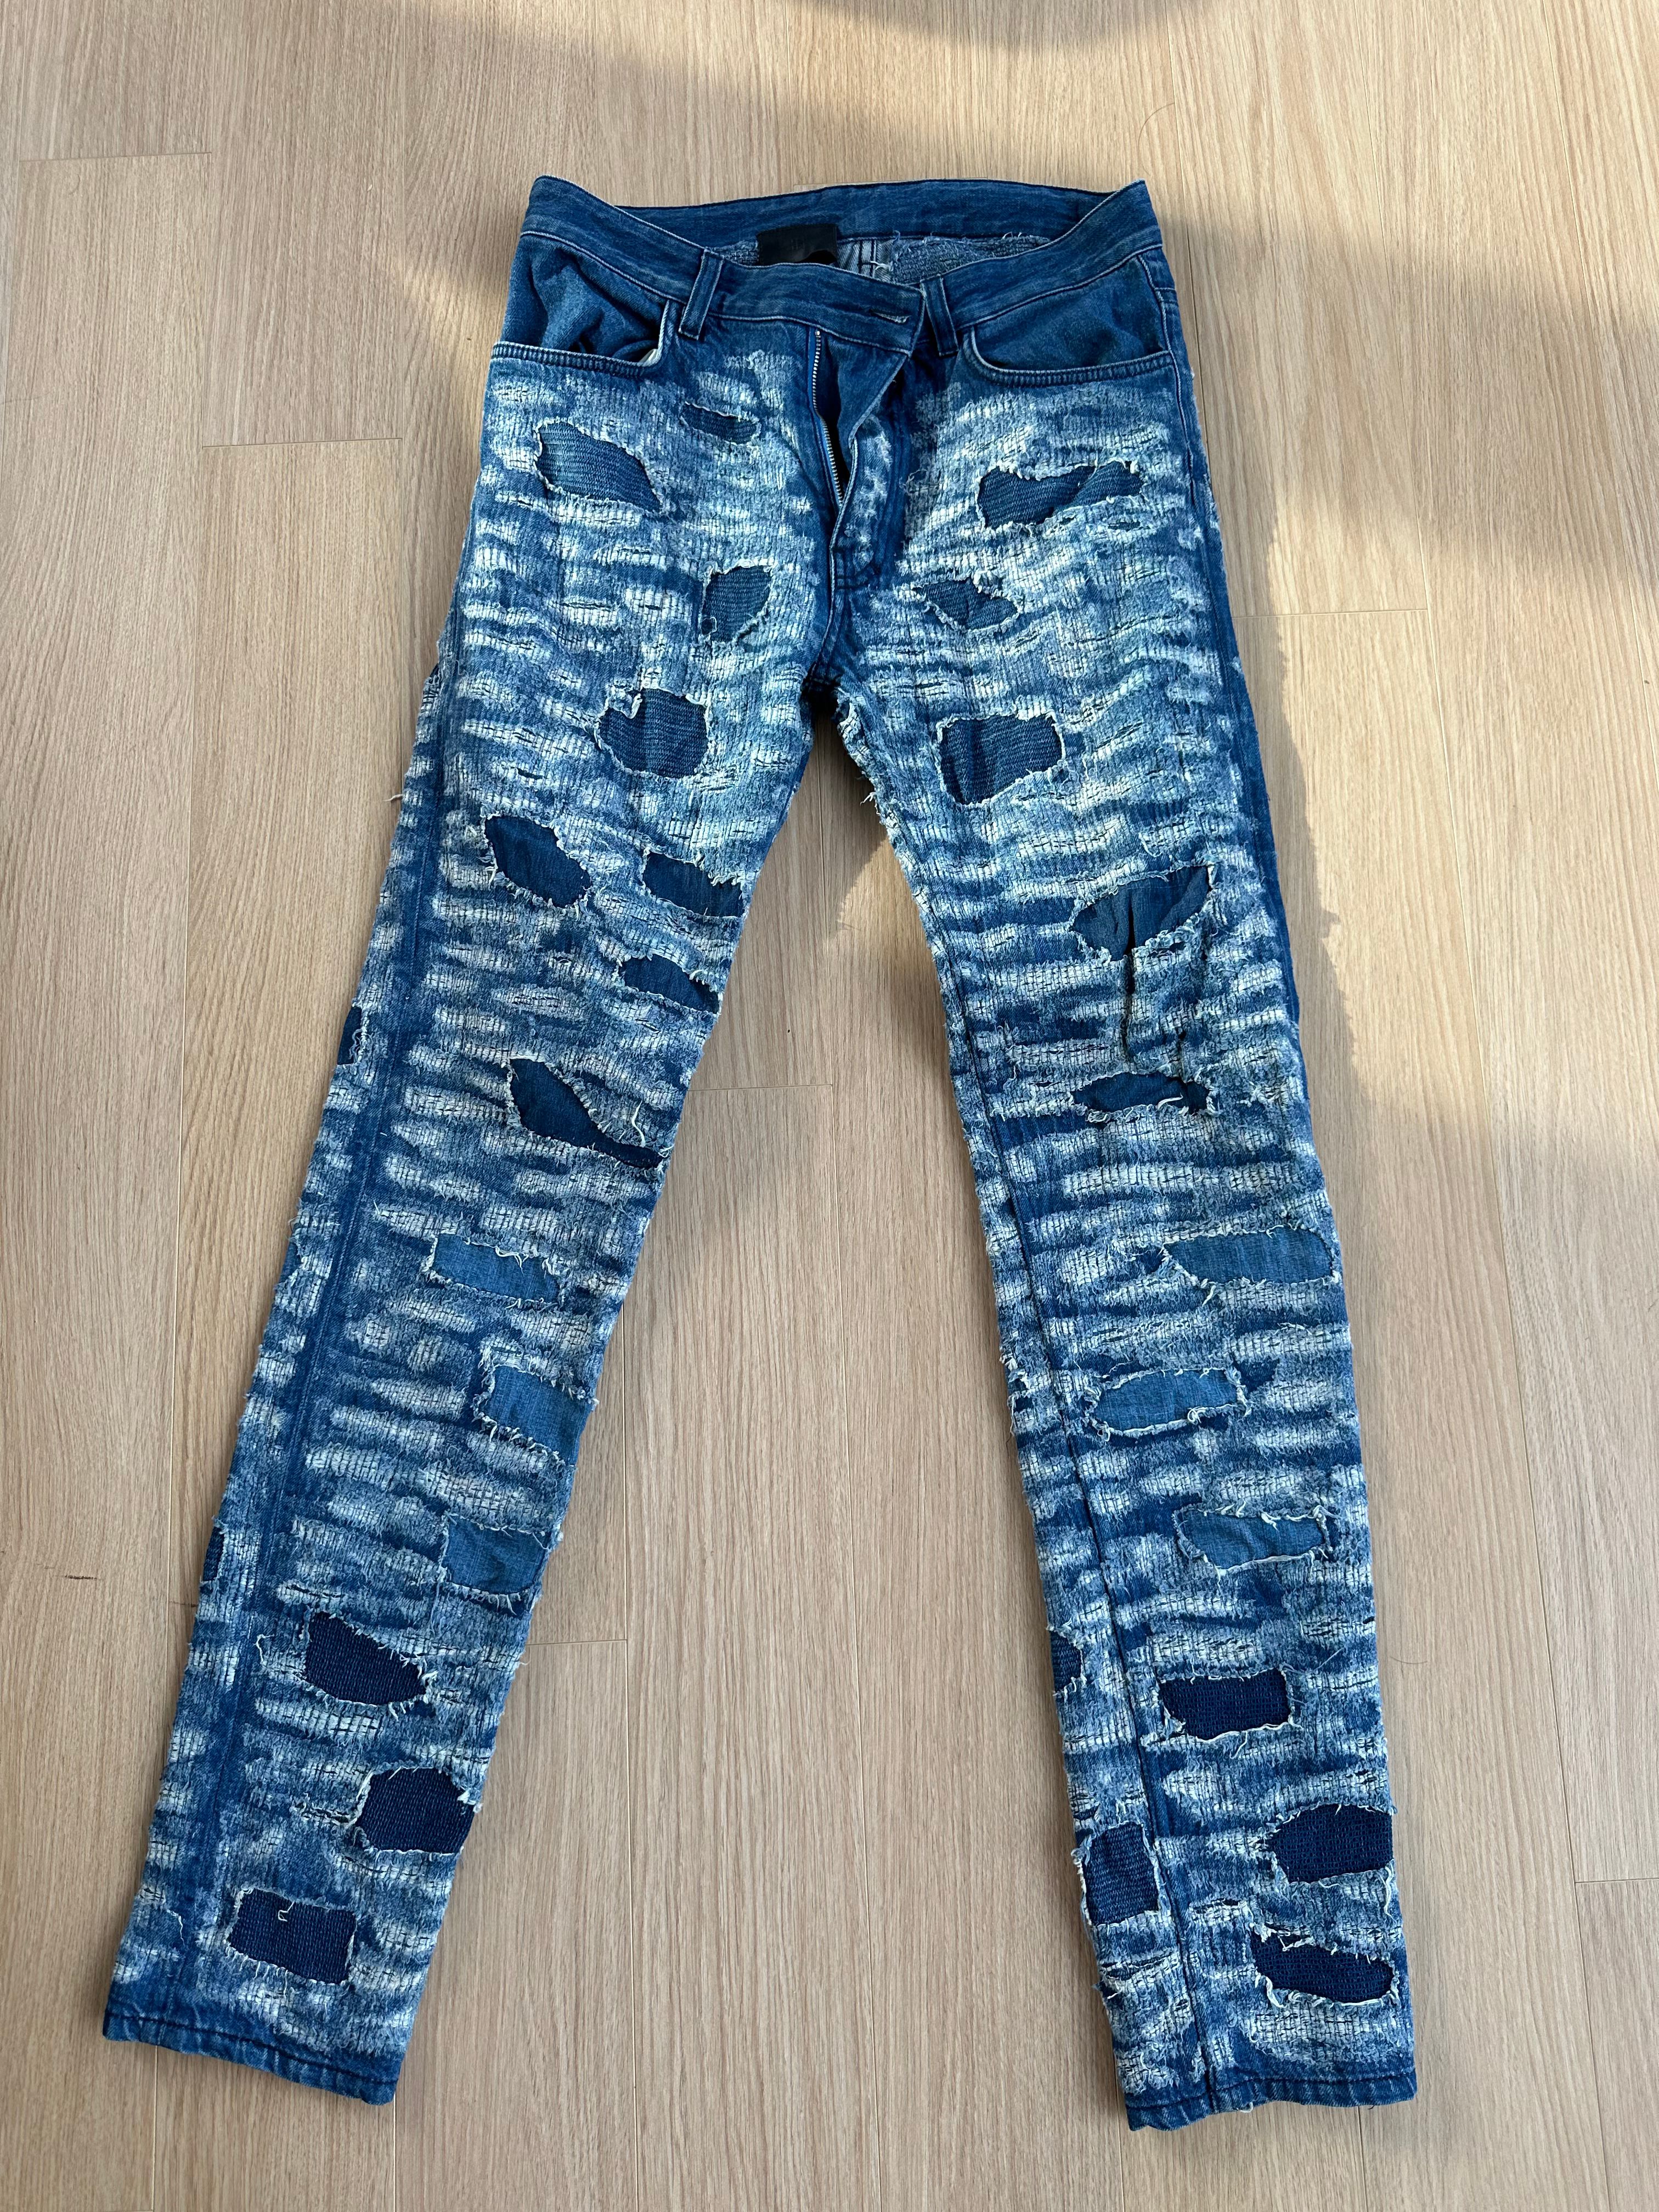 Pre-owned Givenchy Matthew Williams Boro Jeans In Blue